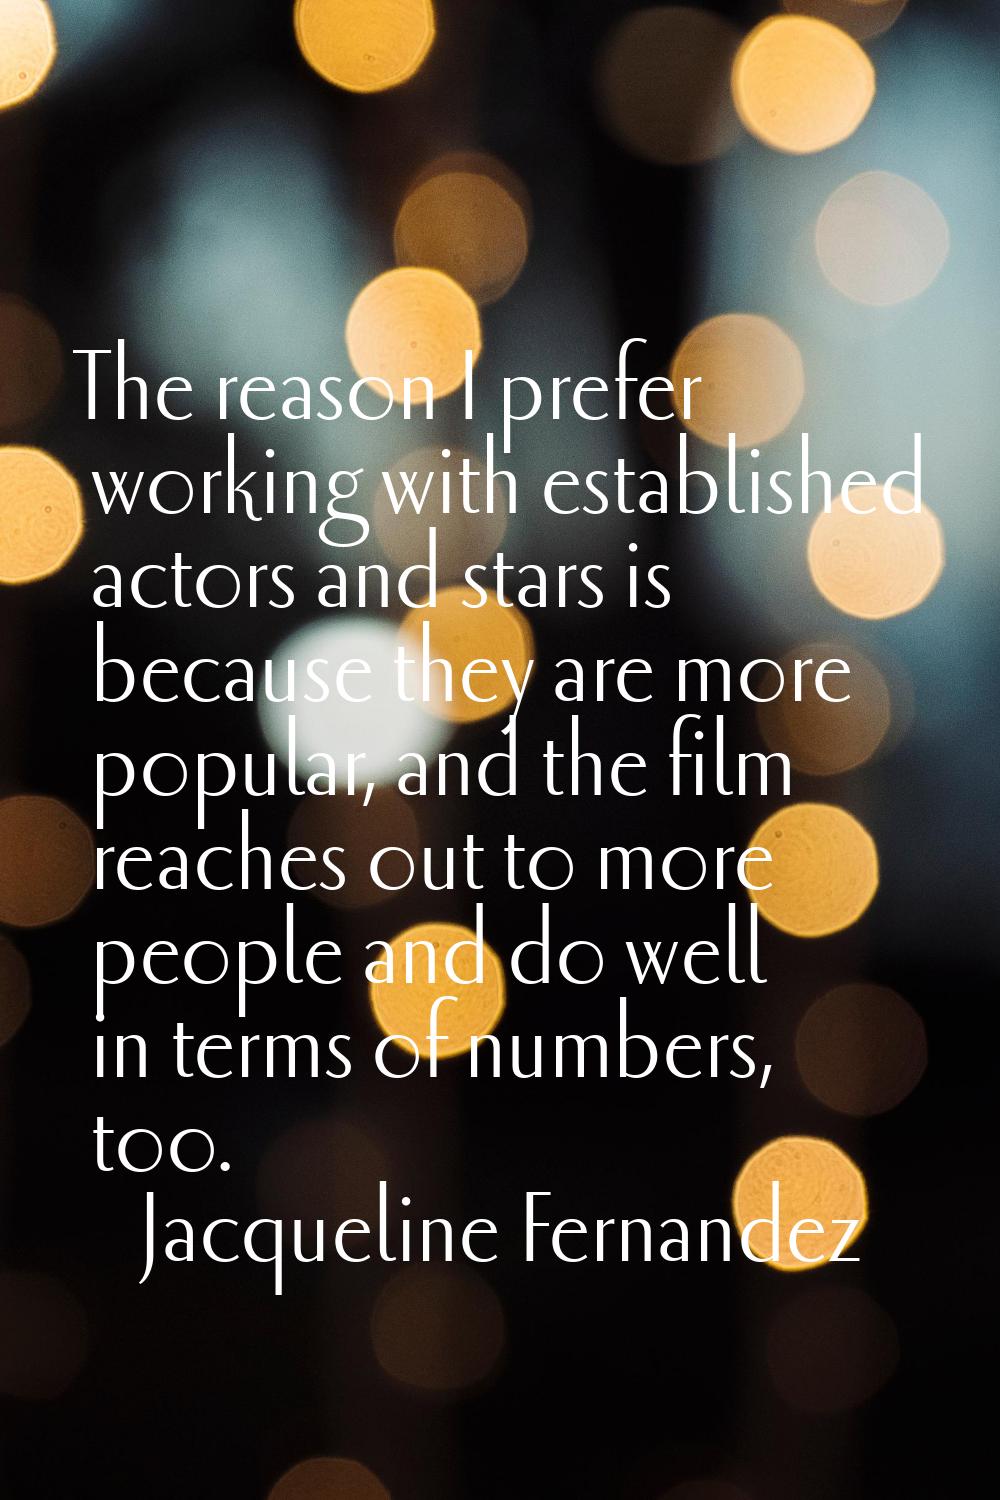 The reason I prefer working with established actors and stars is because they are more popular, and